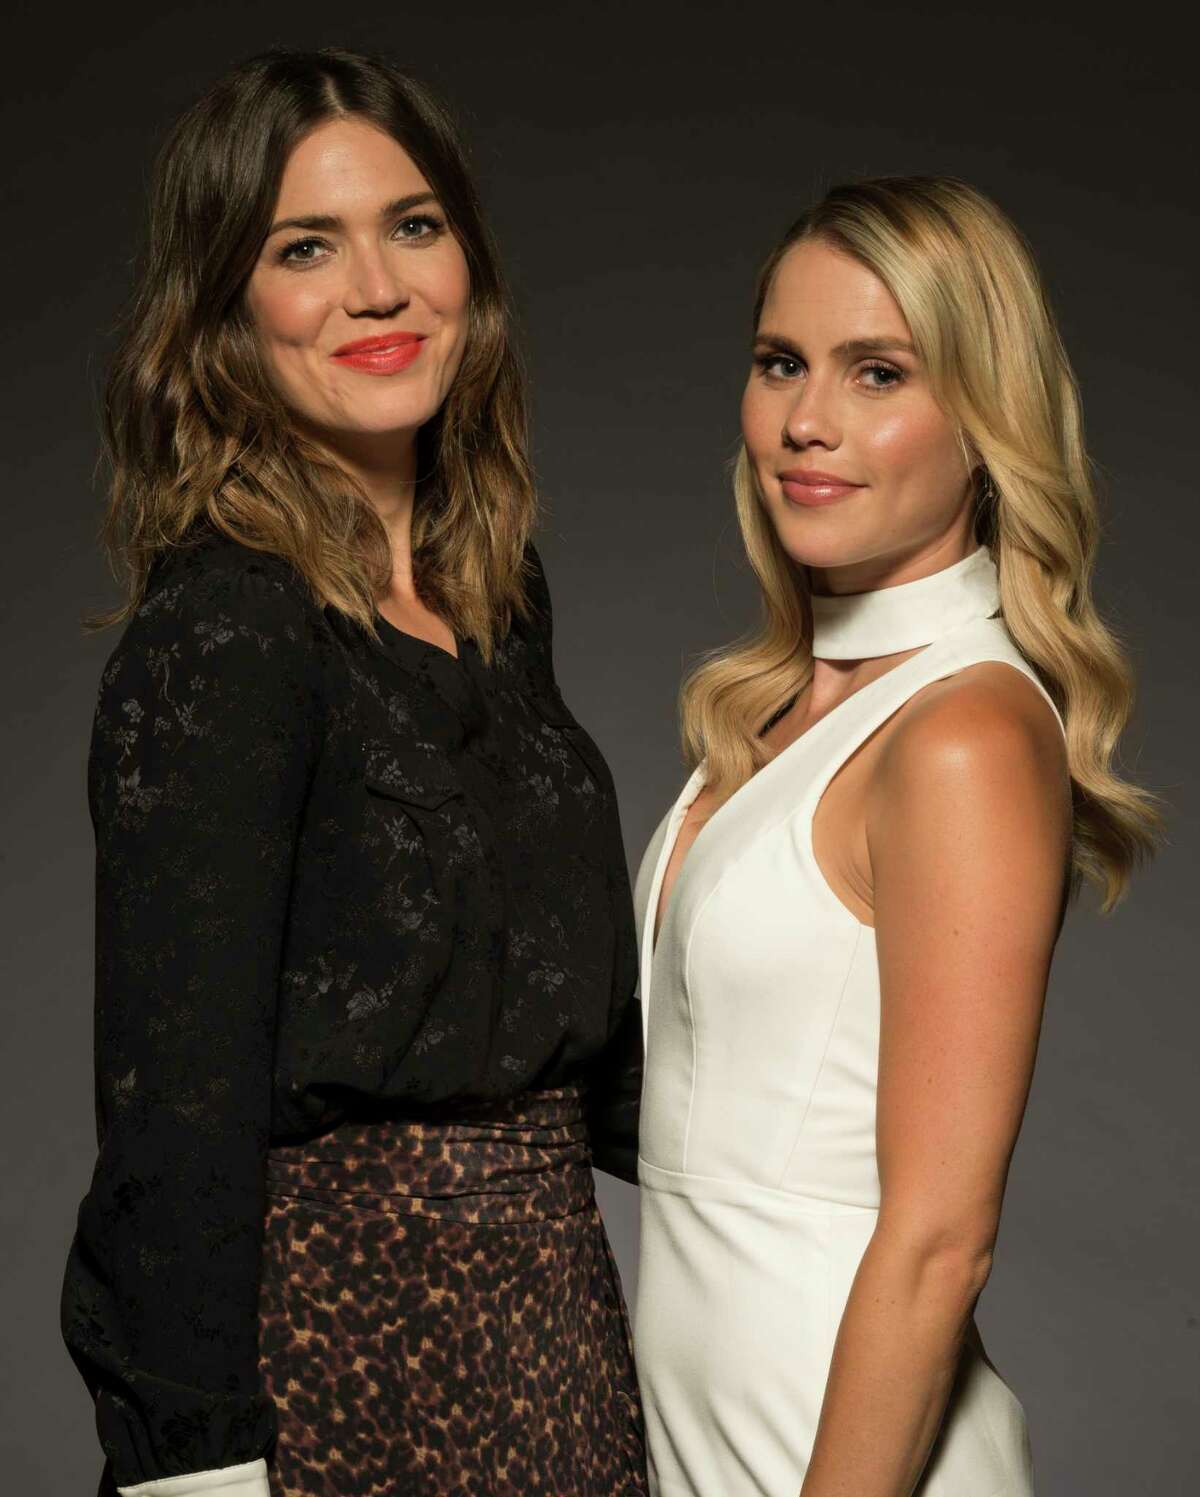 In this June 2, 2017 photo, Mandy Moore, left, and Claire Holt pose for a portrait at the "47 Meters Down" junket at the Montage Hotel in Beverly Hills, Calif. (Photo by Ron Eshel/Invision/AP)